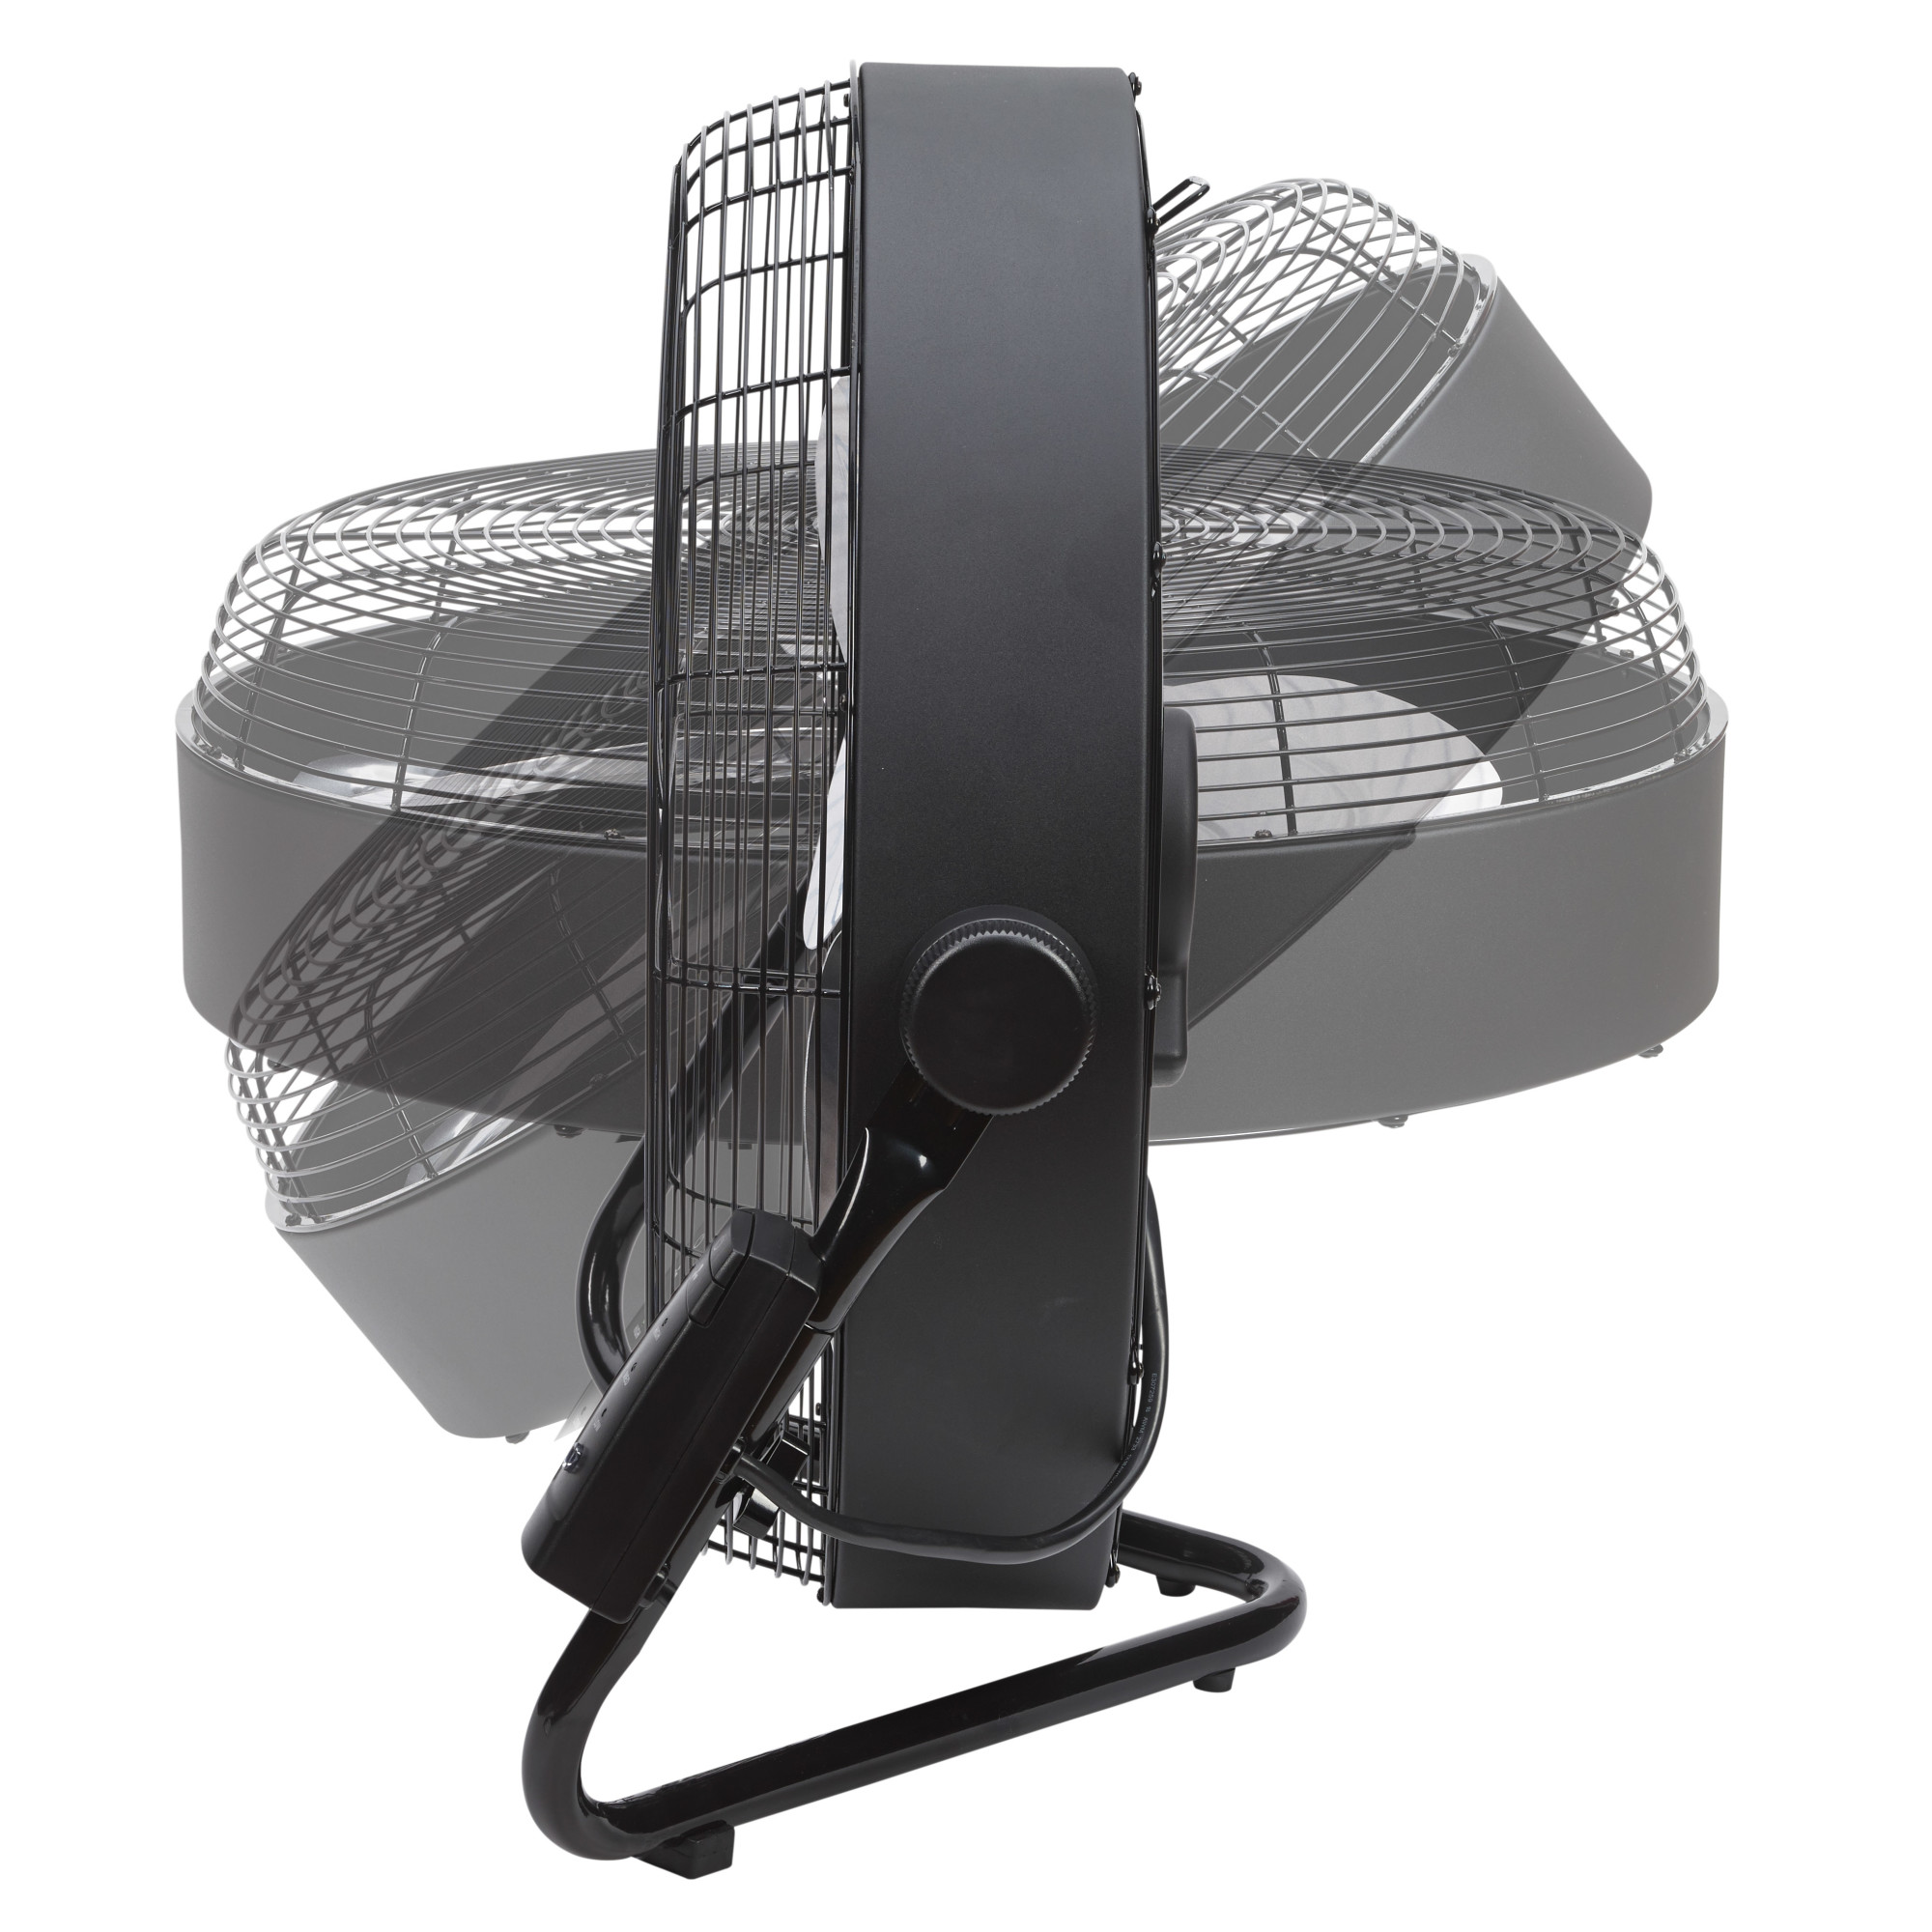 Lasko 20" High Velocity Floor Fan, Wall Mount Option and Remote, 22" H, Black, H20685, New - image 3 of 6